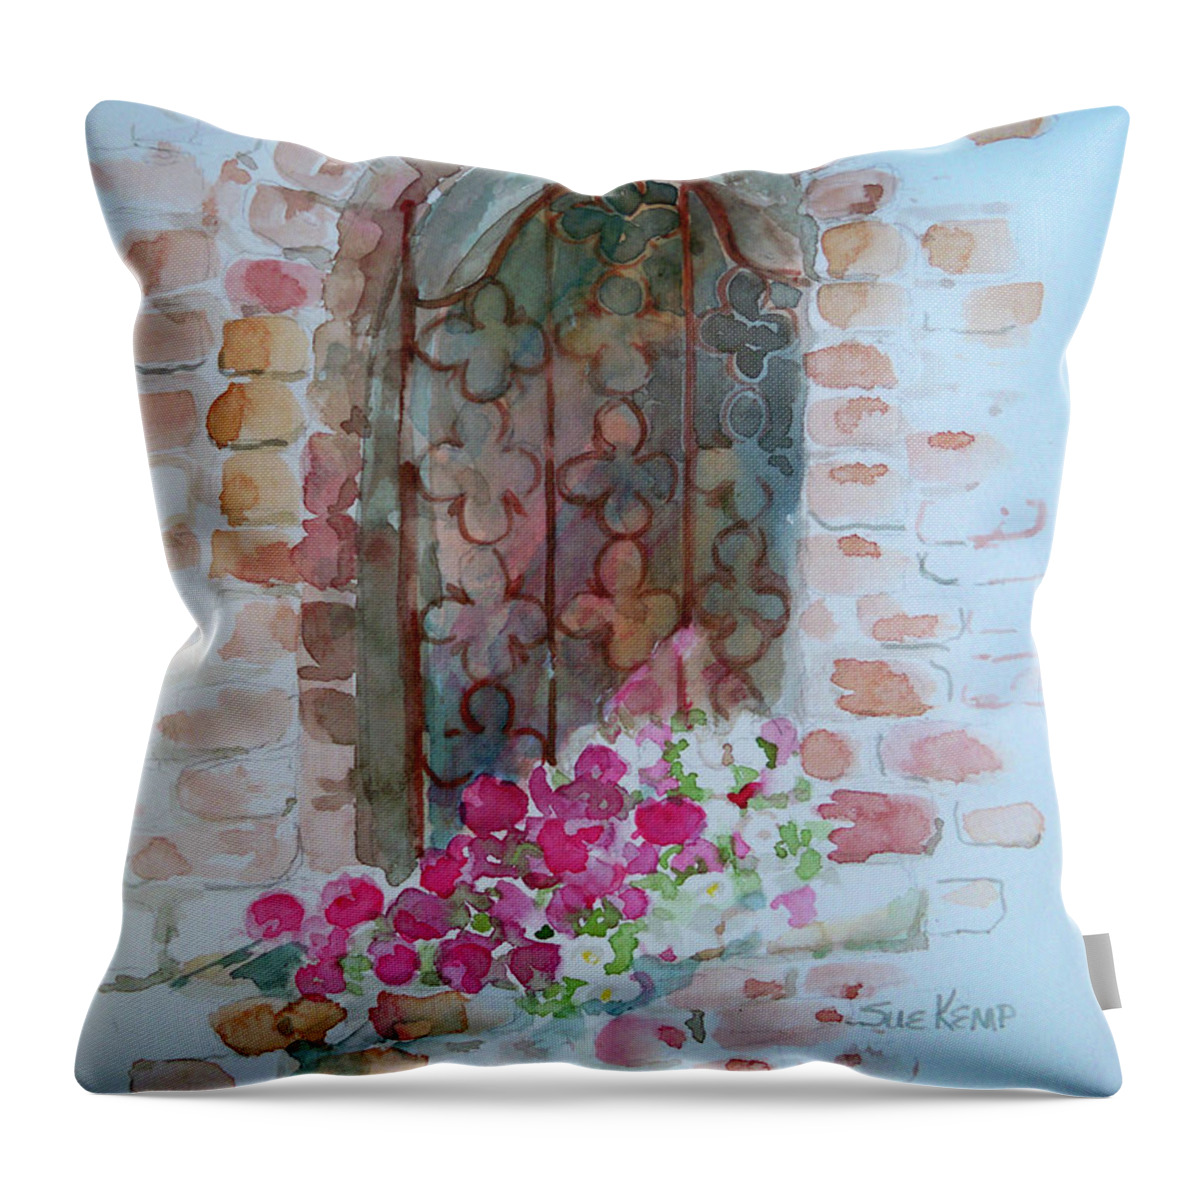 Window Box Throw Pillow featuring the painting The Window by Sue Kemp